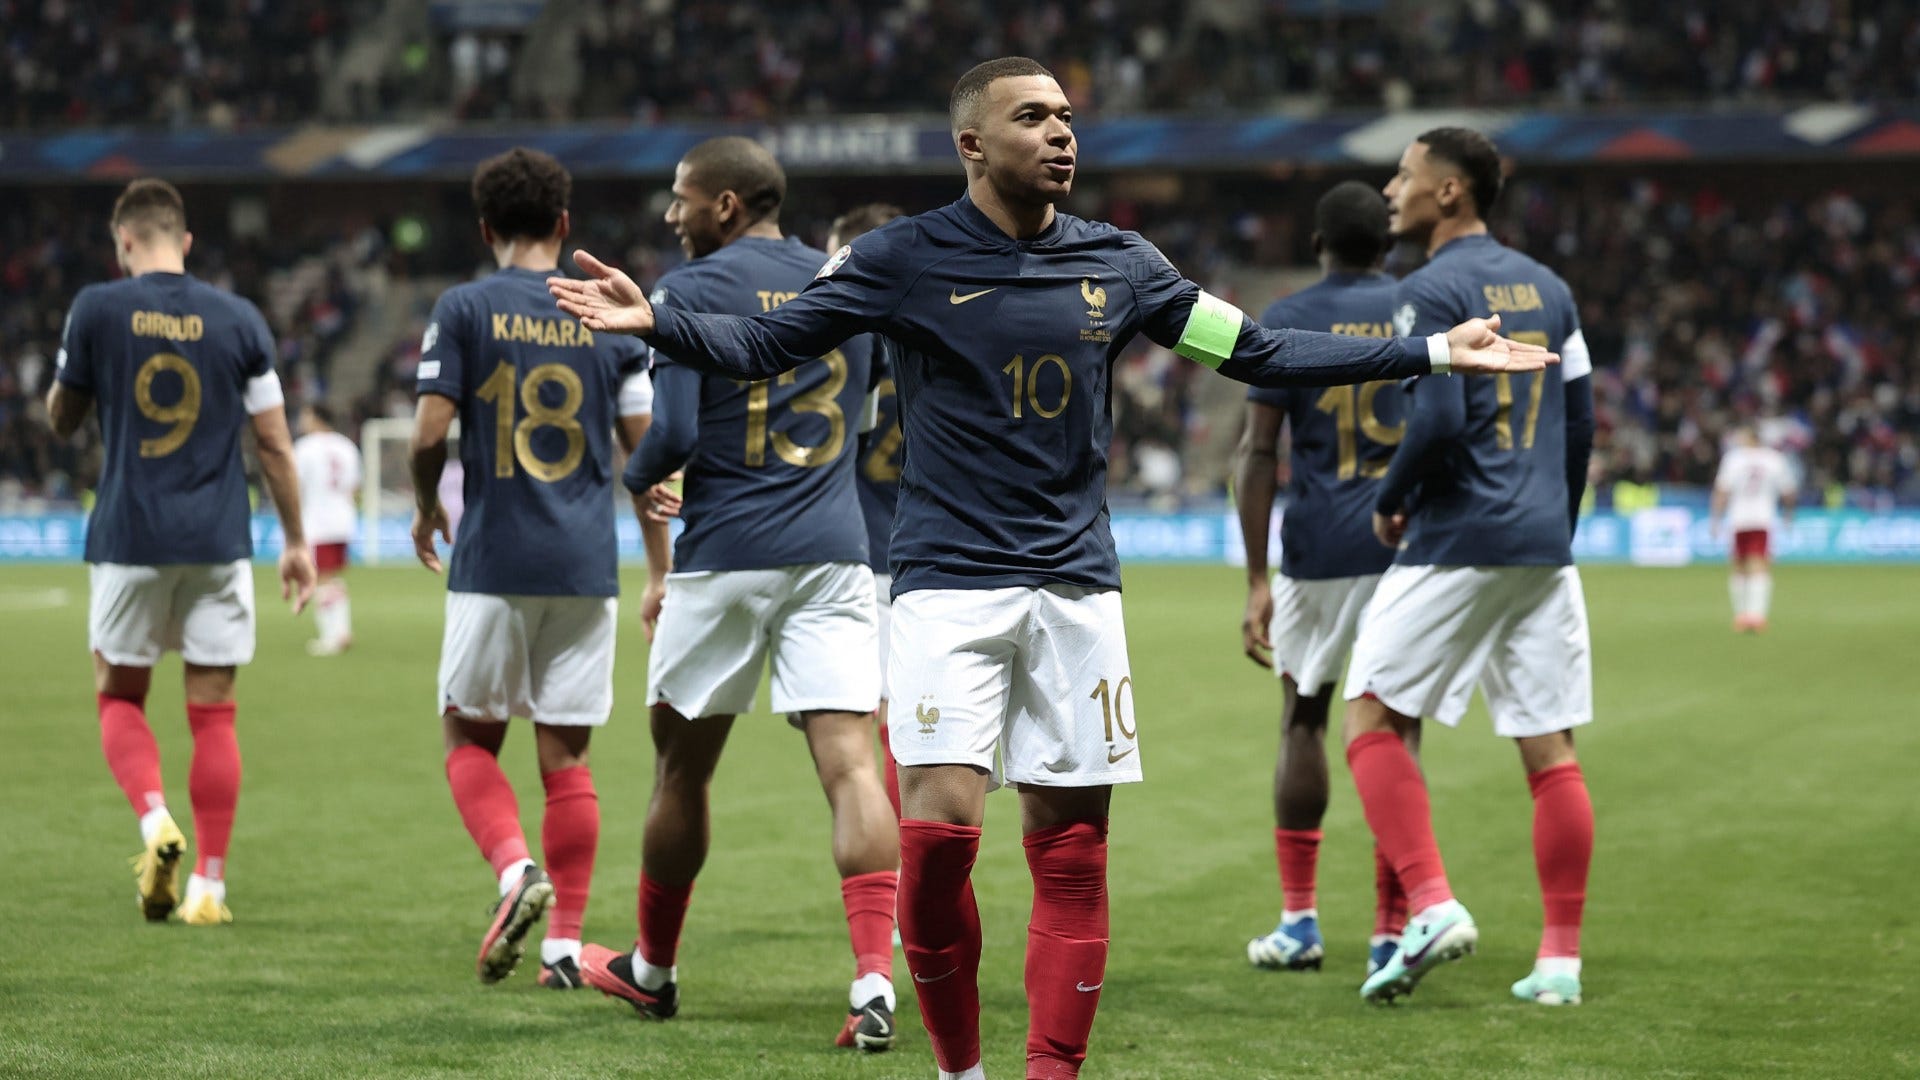 Greece vs France: Live stream, TV channel, kick-off time & where to watch | Goal.com US